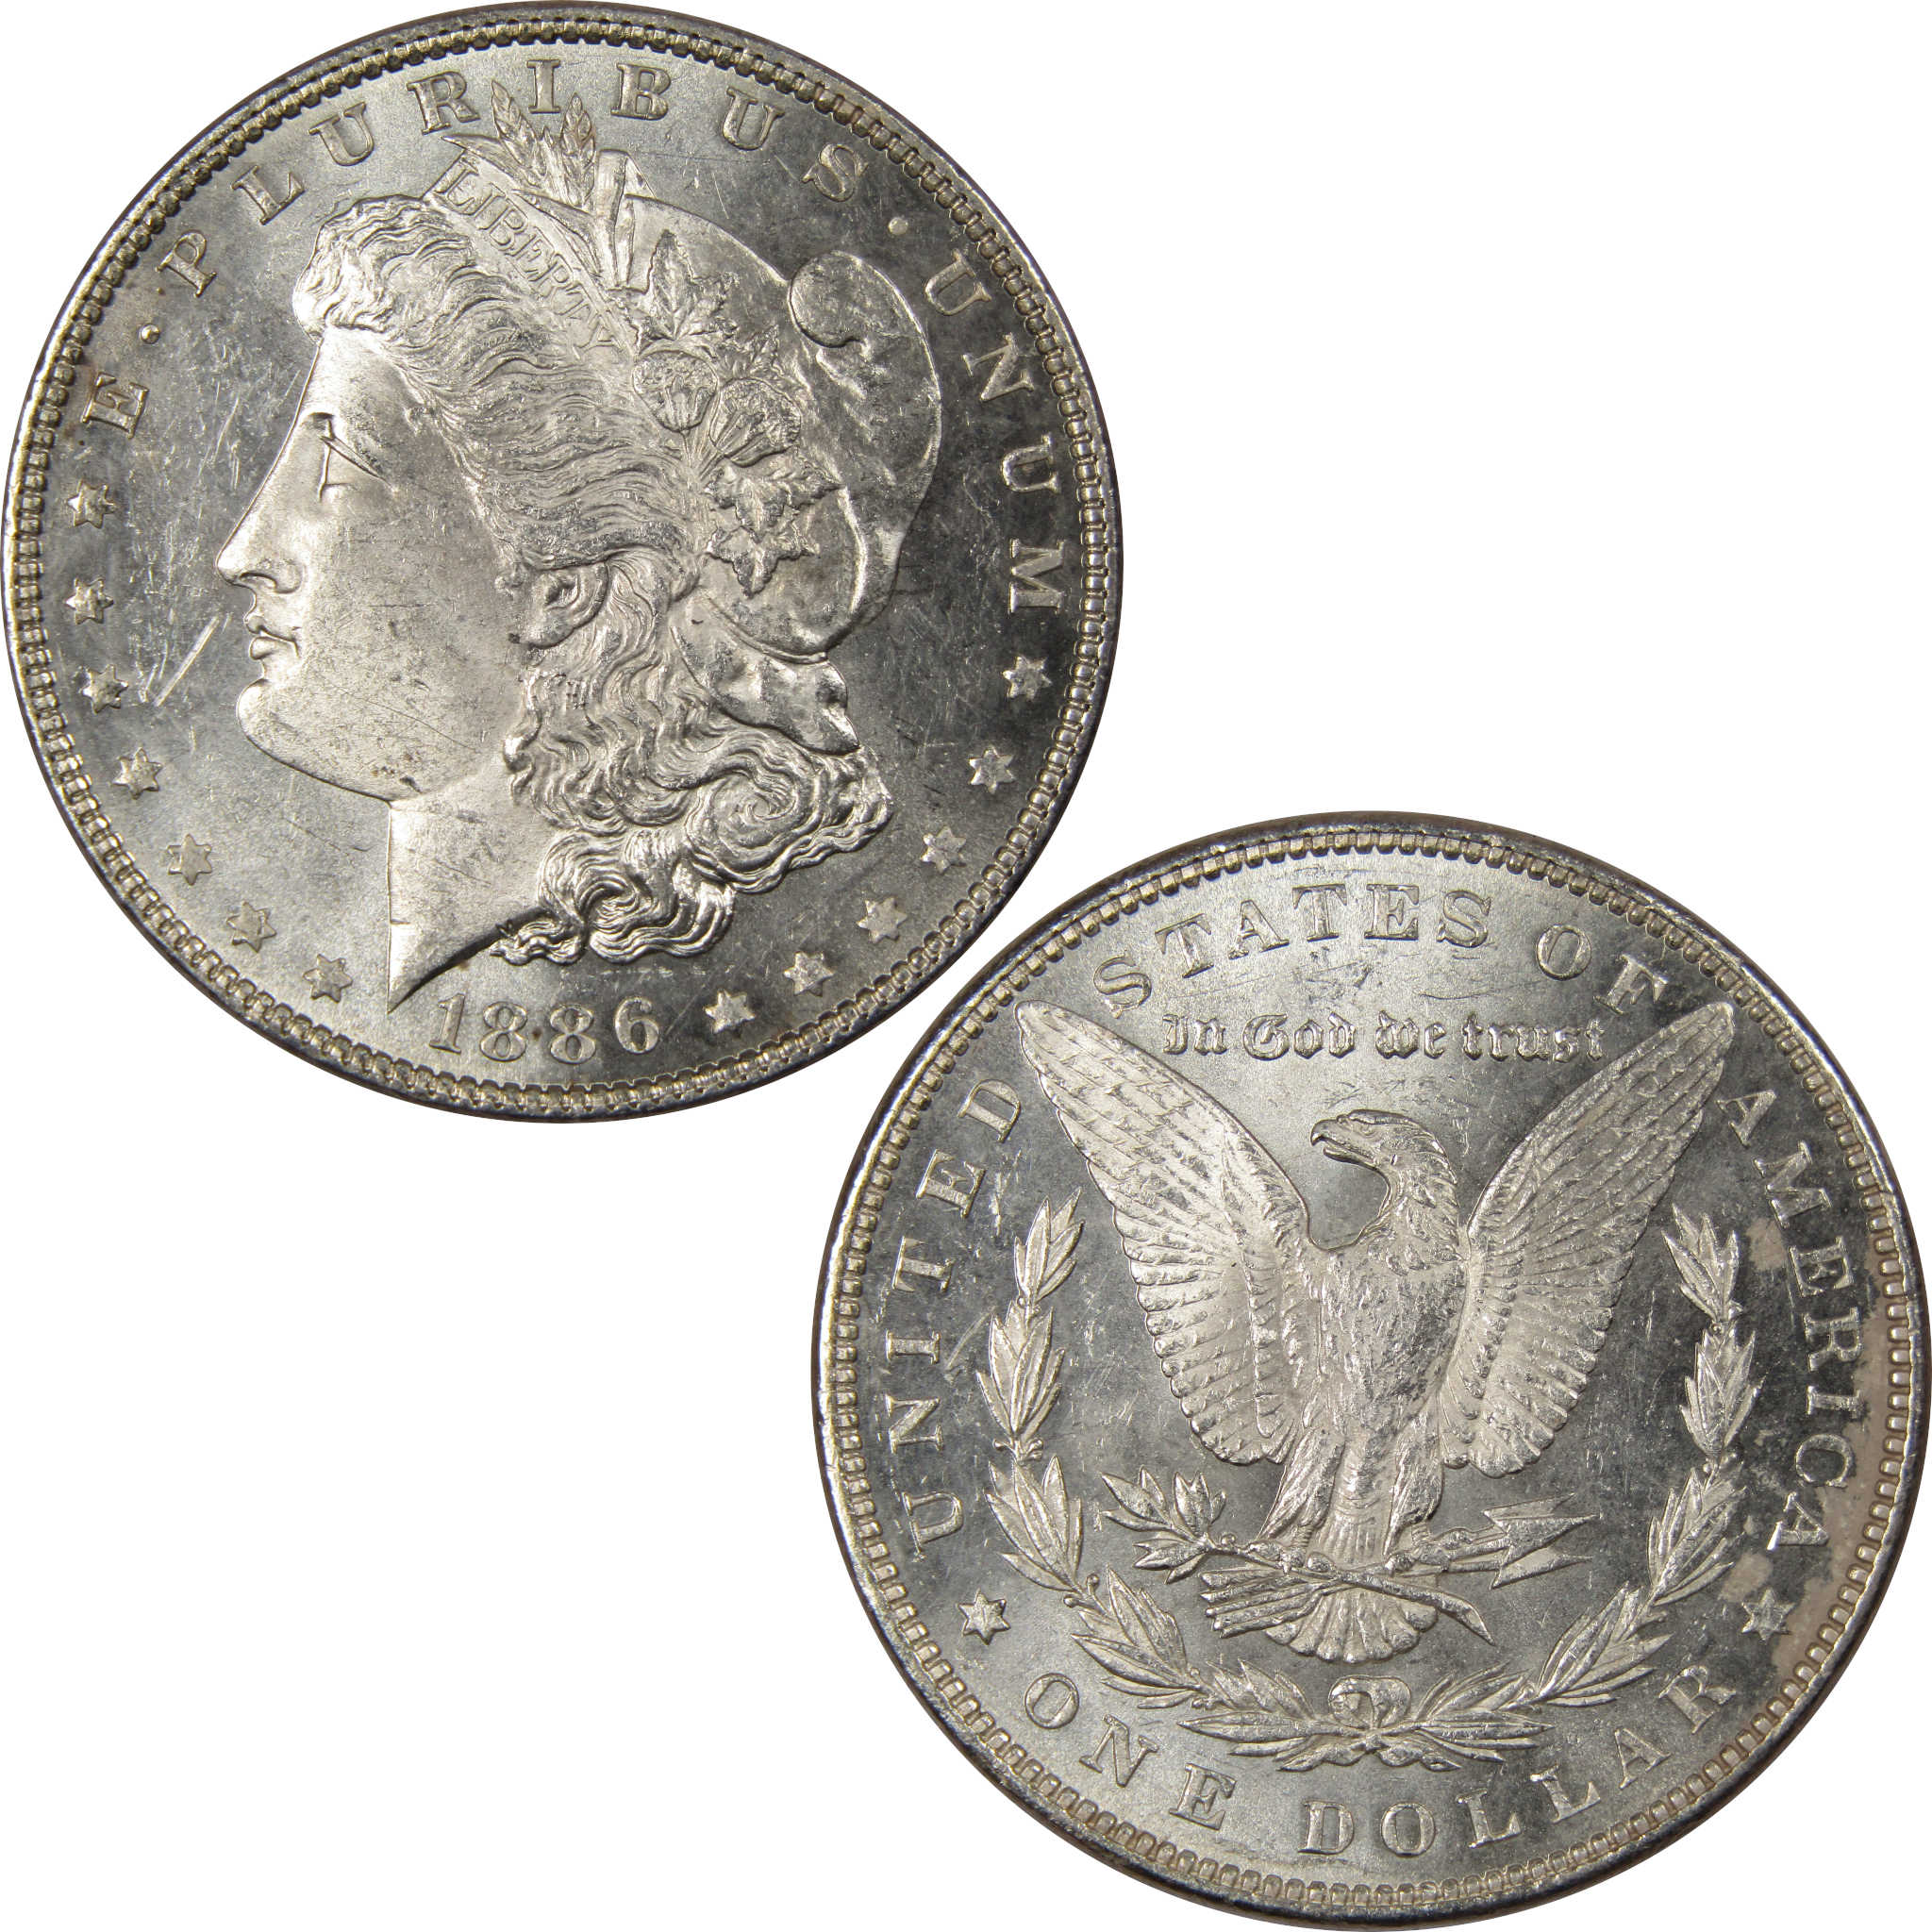 1886 Morgan Dollar Uncirculated Details 90% Silver Coin SKU:IPC7093 - Morgan coin - Morgan silver dollar - Morgan silver dollar for sale - Profile Coins &amp; Collectibles